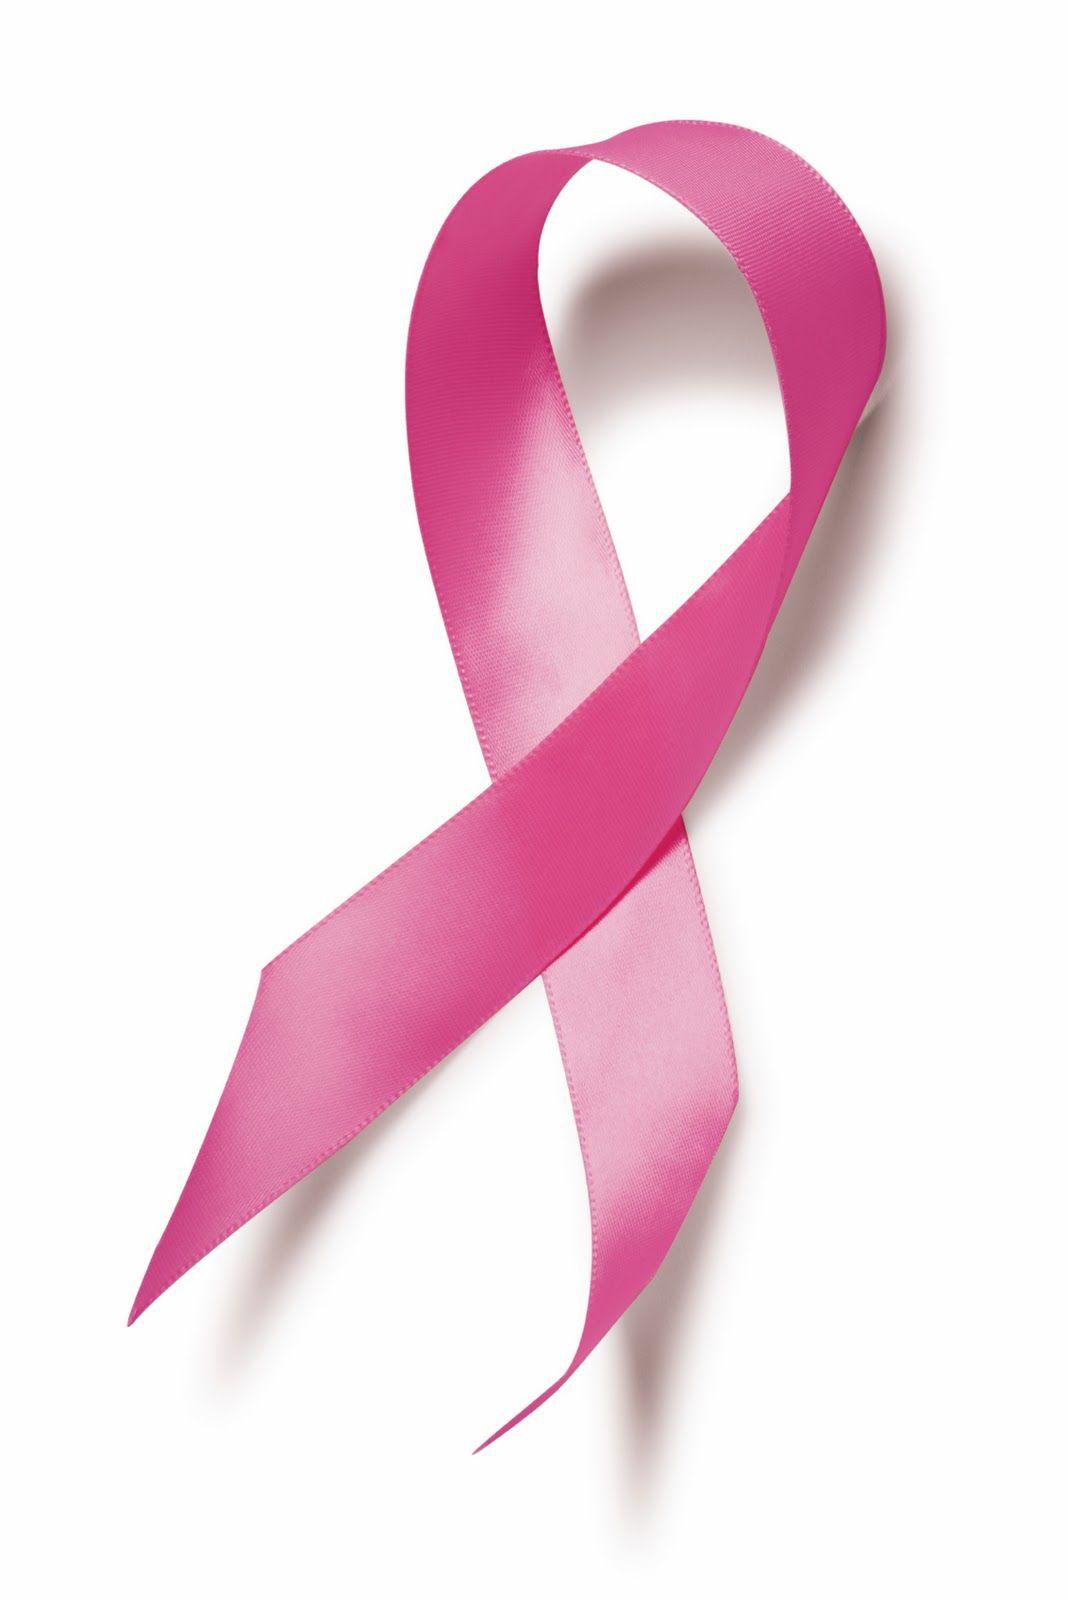 Breast Cancer Picture. Breast Cancer Ribbon Logo Wallpaper